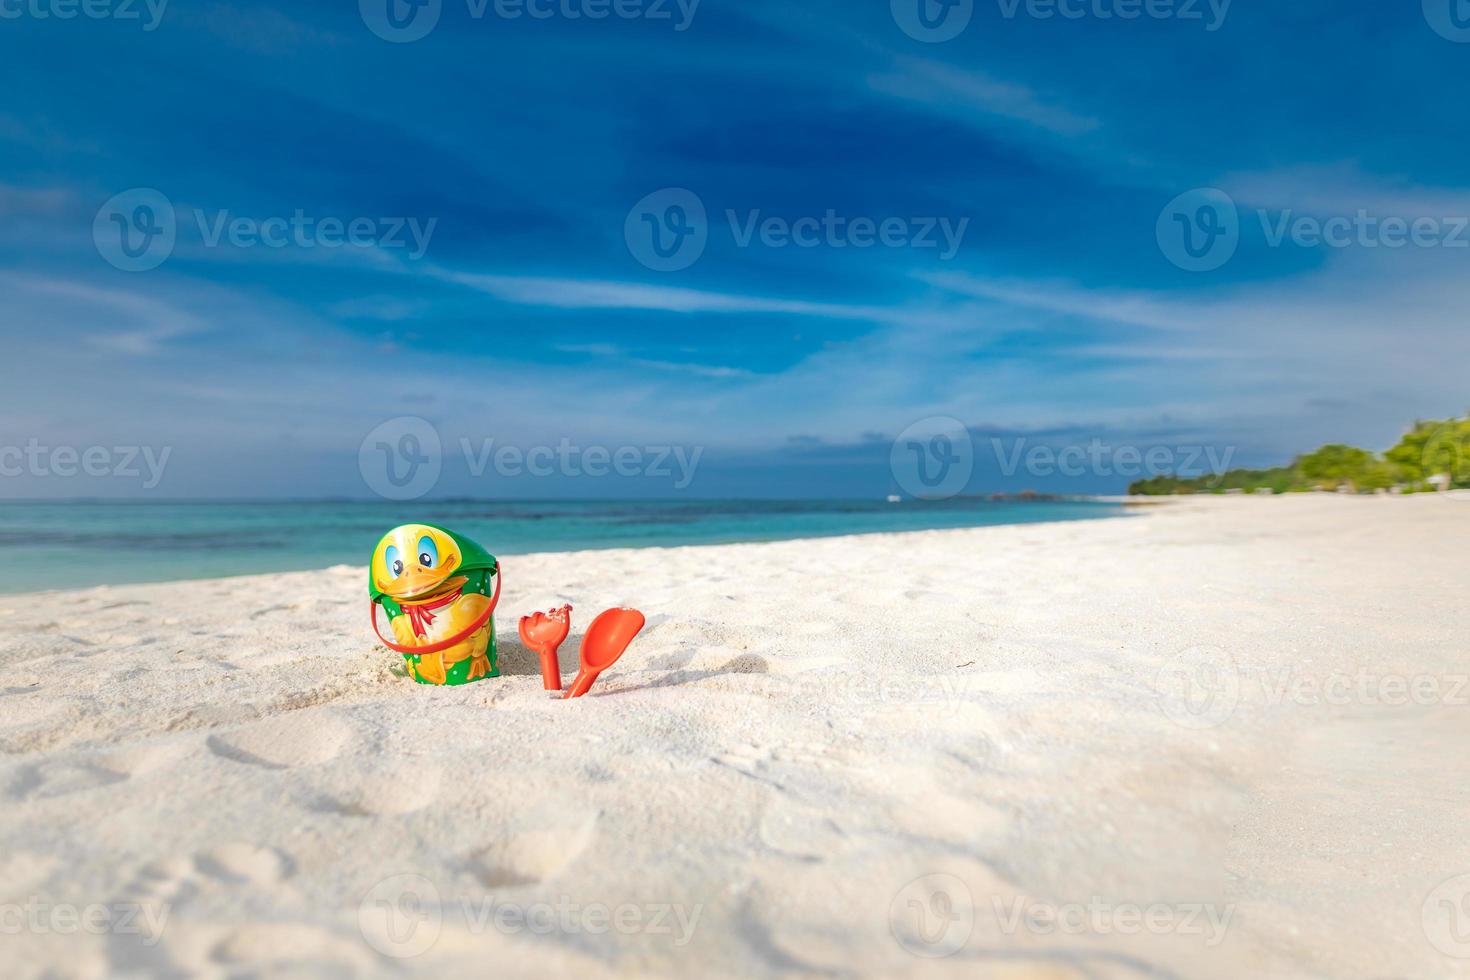 Children's beach toys - buckets, spade and shovel on sand on a sunny day. Topical island beach holiday, tourism background. Cute beach toys photo